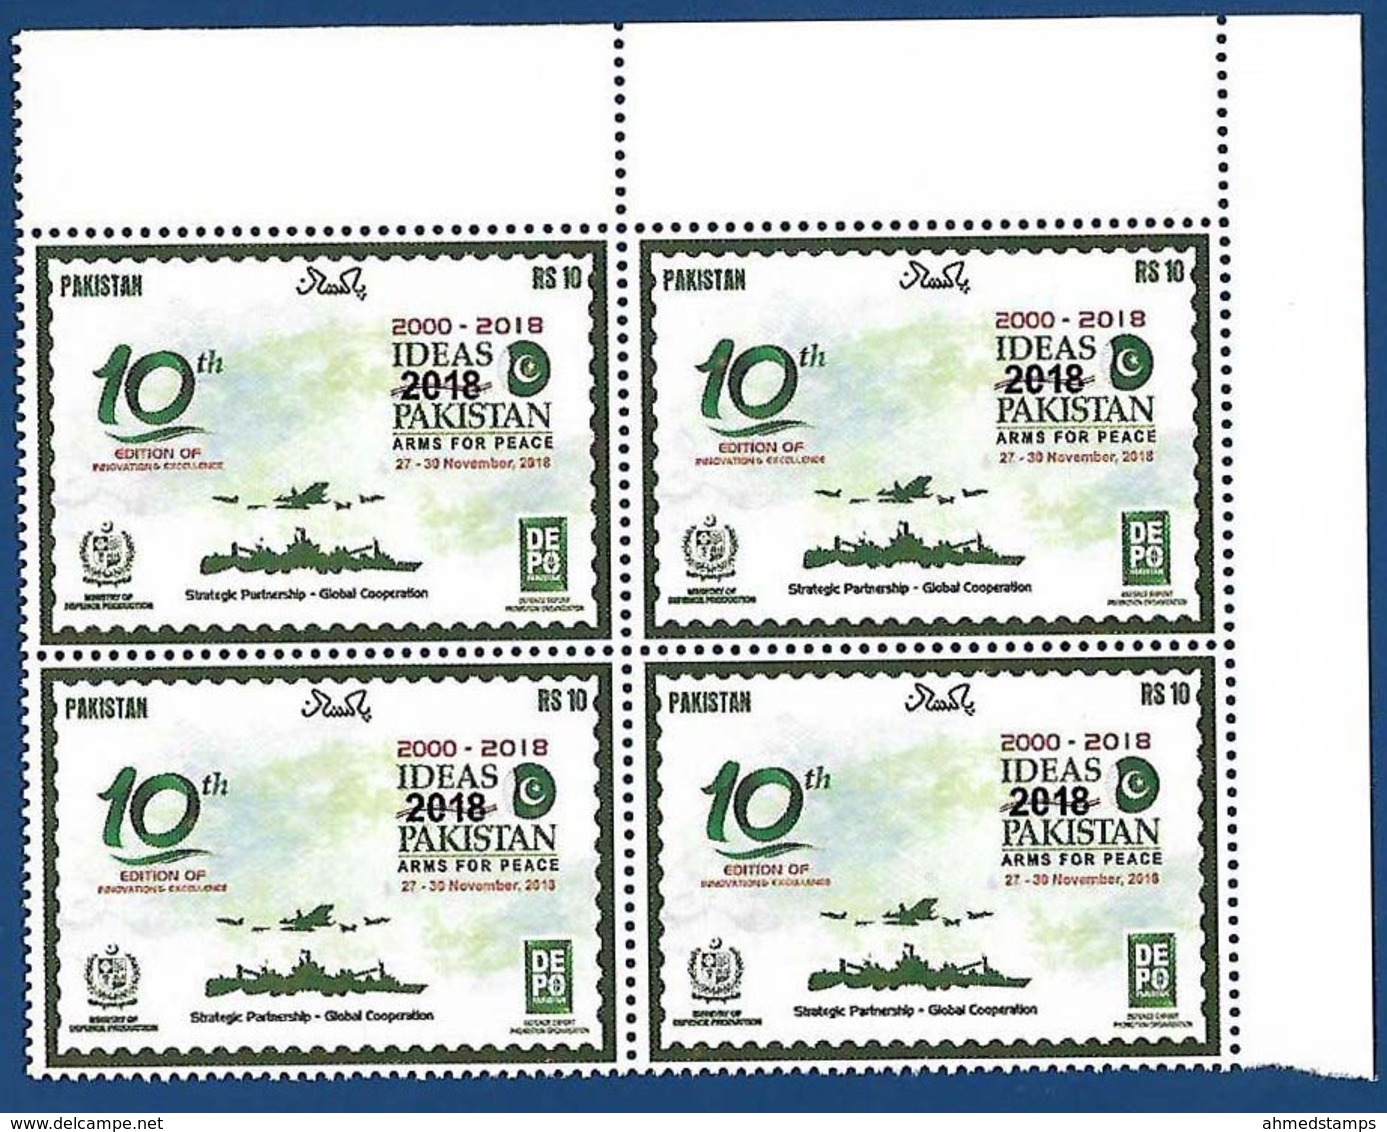 PAKISTAN MNH IDEAS 2018 ARMS FOR PEACE 10th EDITION ARMY NAVY AIRFORCE - Pakistan